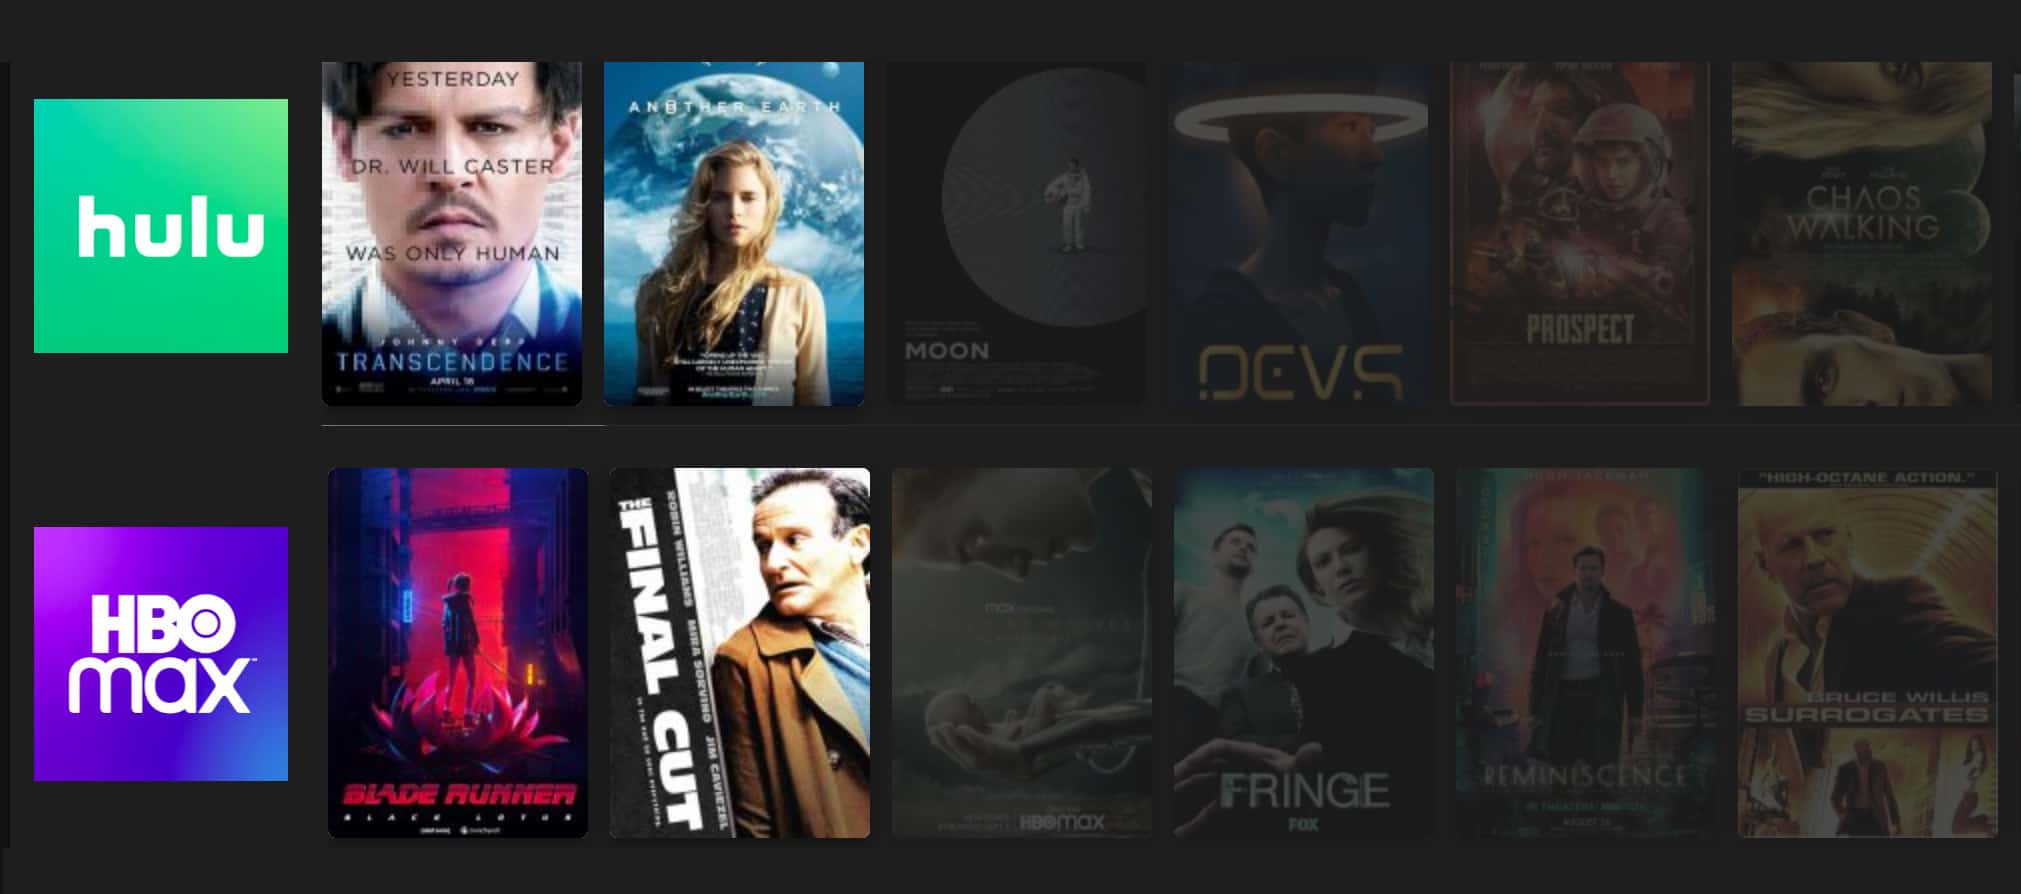 Hulu and HBO Max filtered movie list